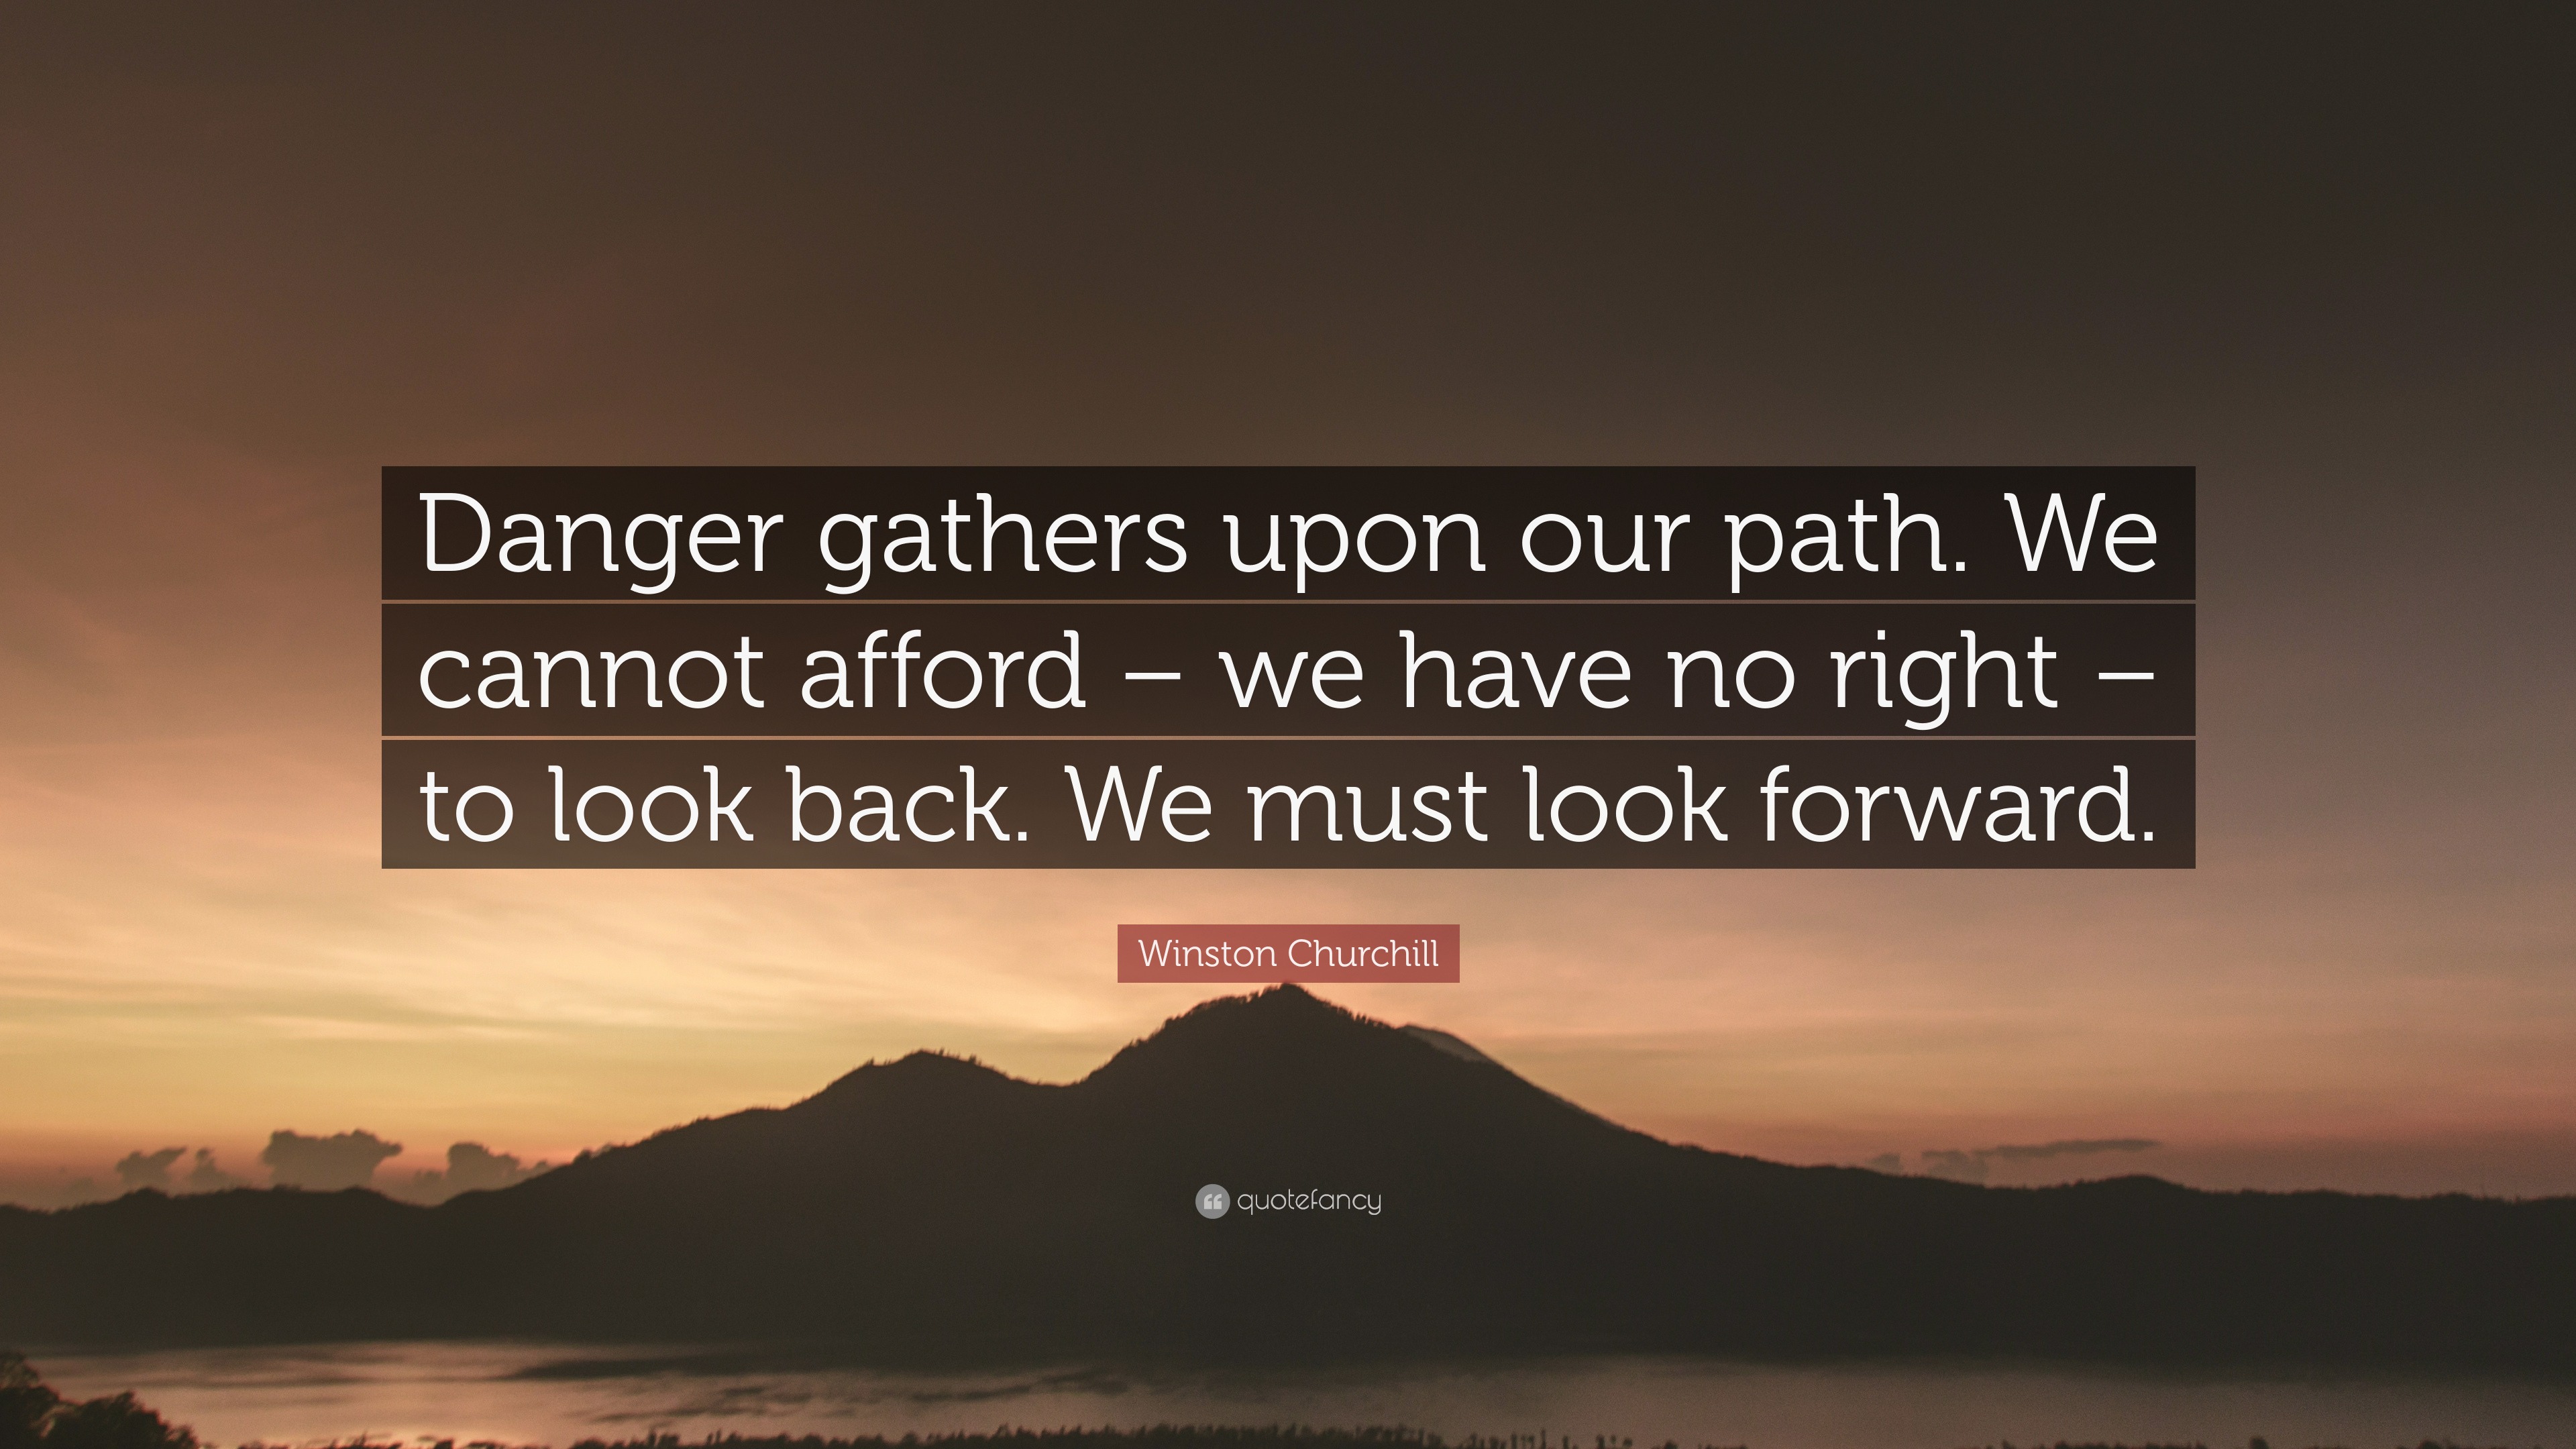 Winston Churchill Quote Danger Gathers Upon Our Path We Cannot Afford We Have No Right To